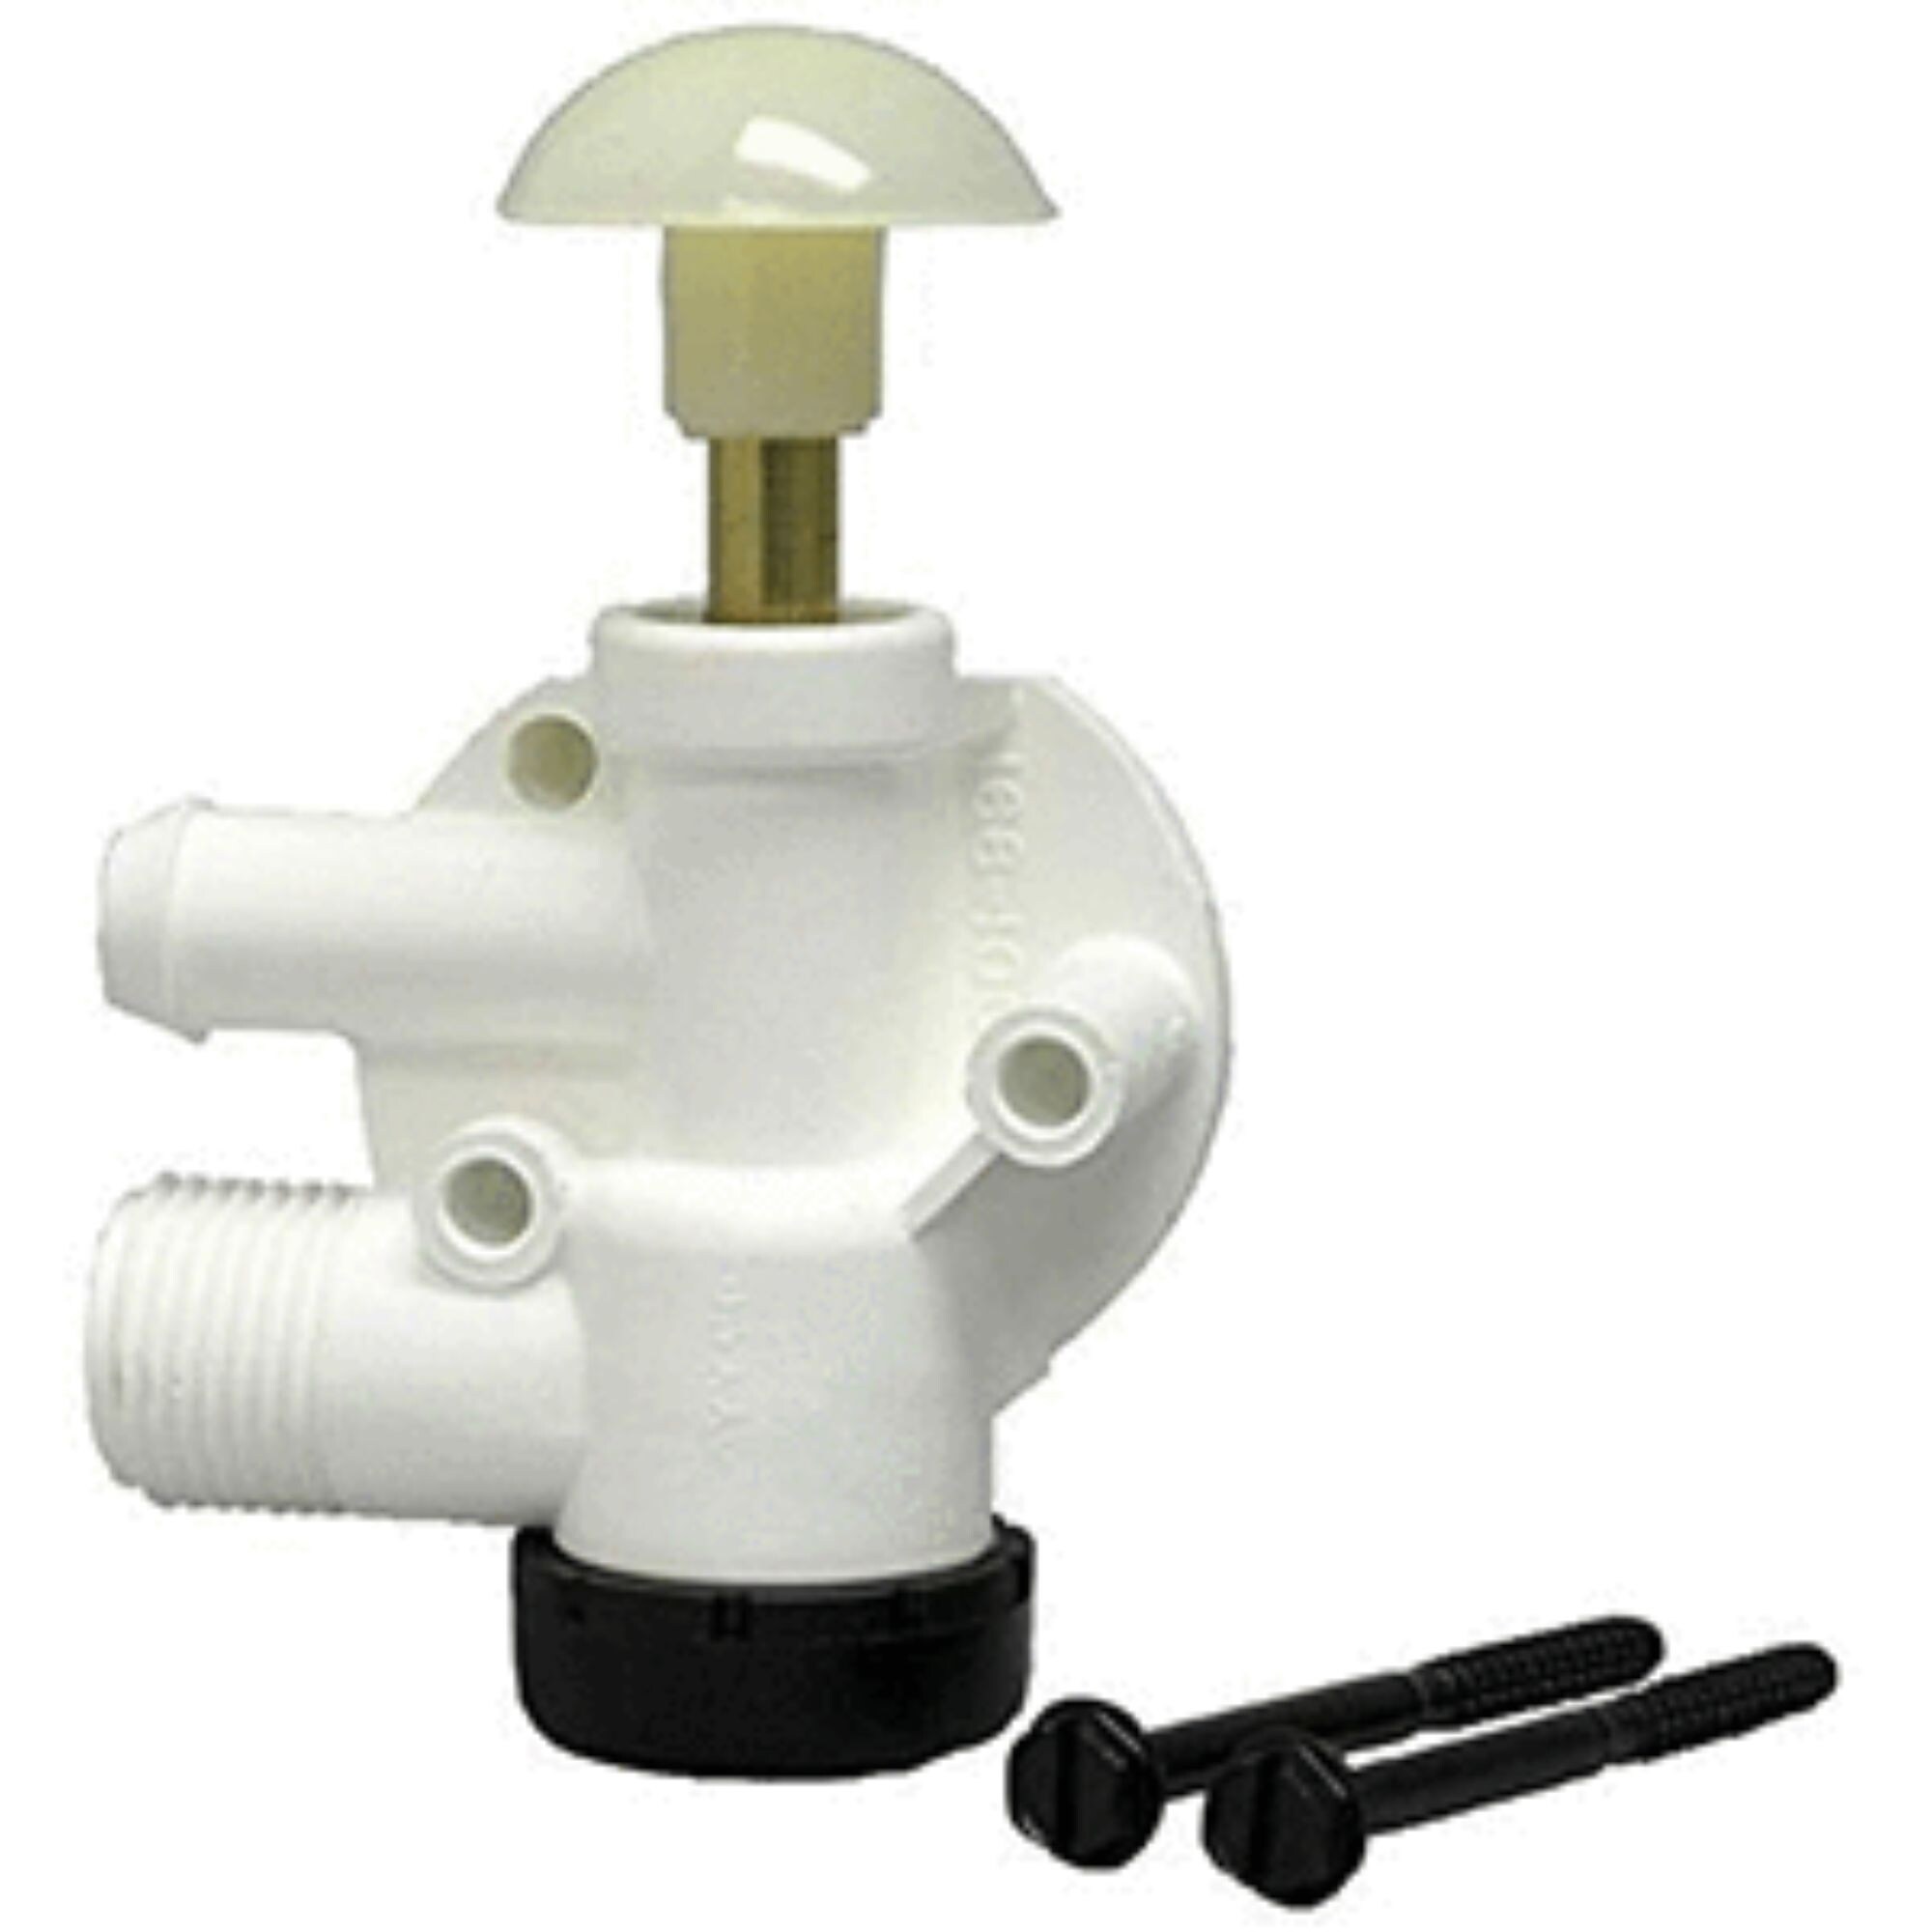 5" White and Black Maritime Parts and Accessories Dometic Water Valve Kit for Push Pedal Toilet Only